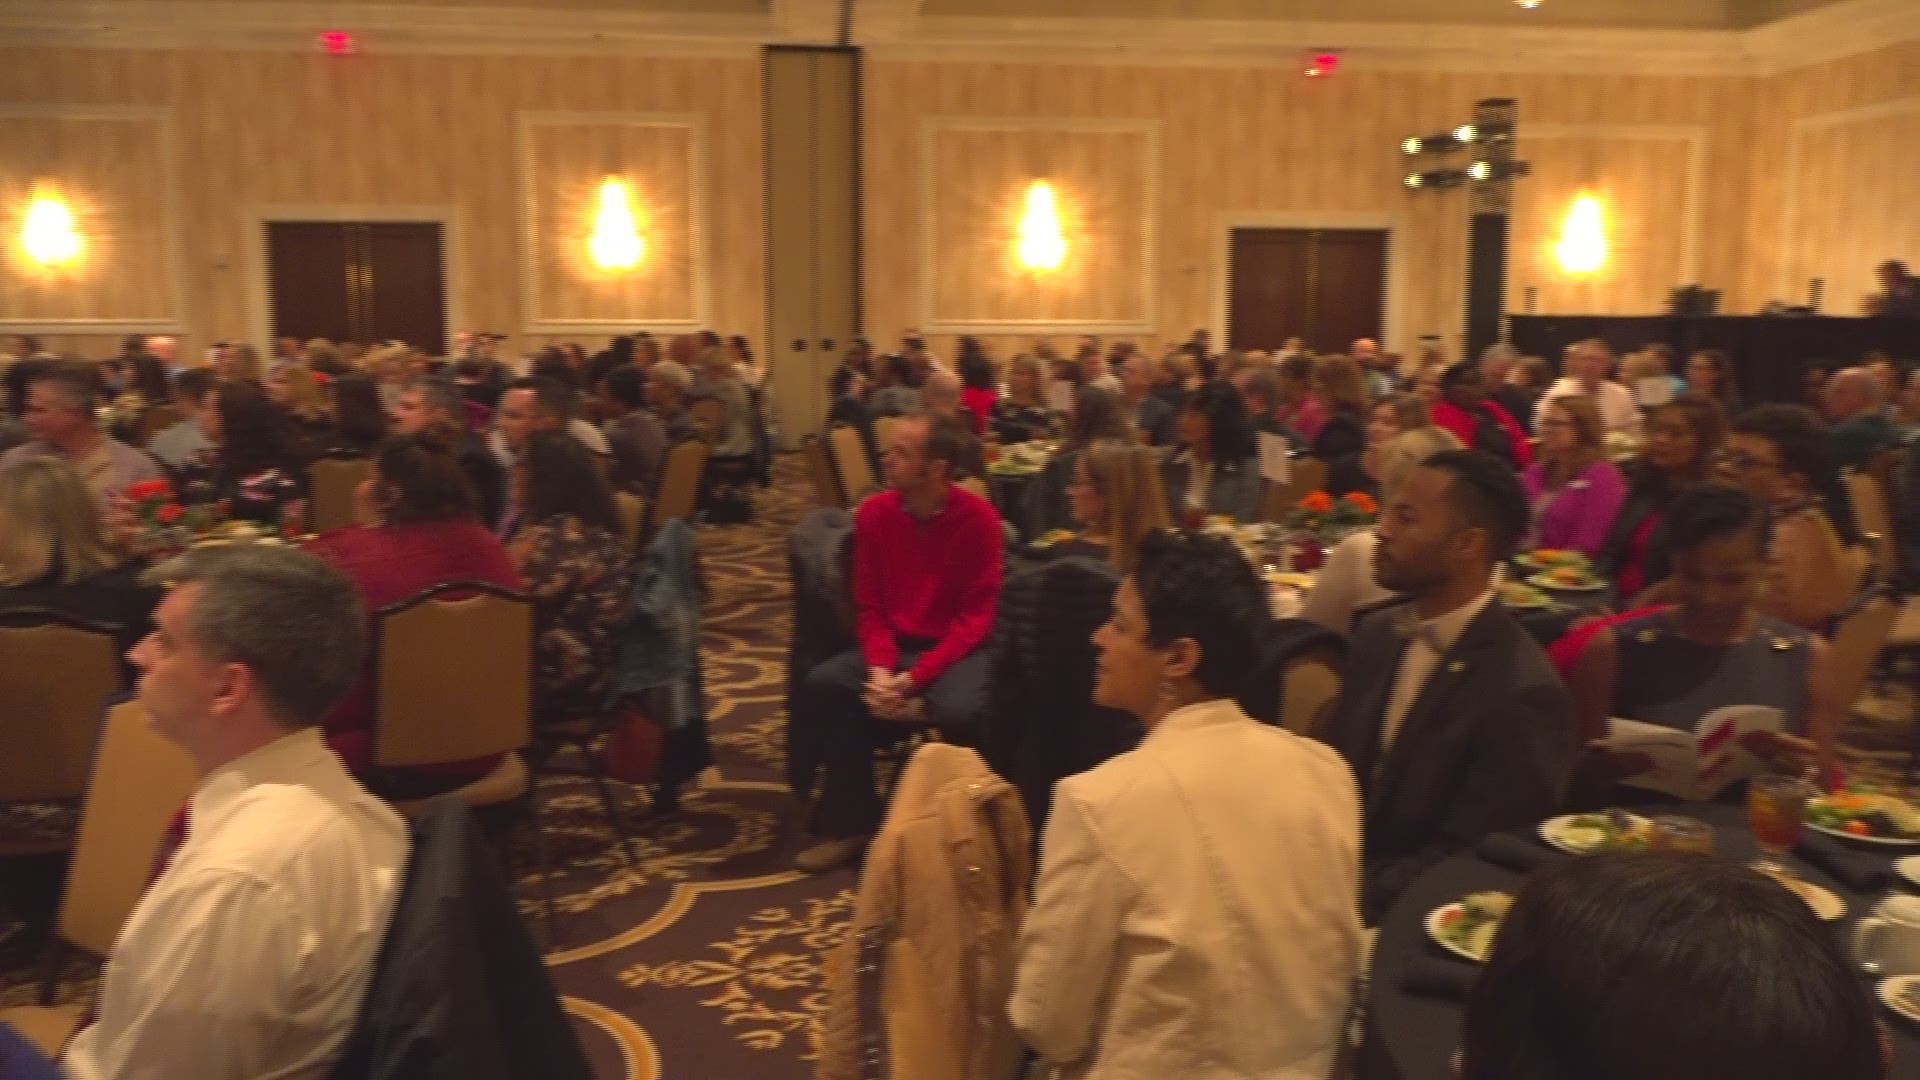 More than 100 volunteers were recognized for their outstanding work local children.